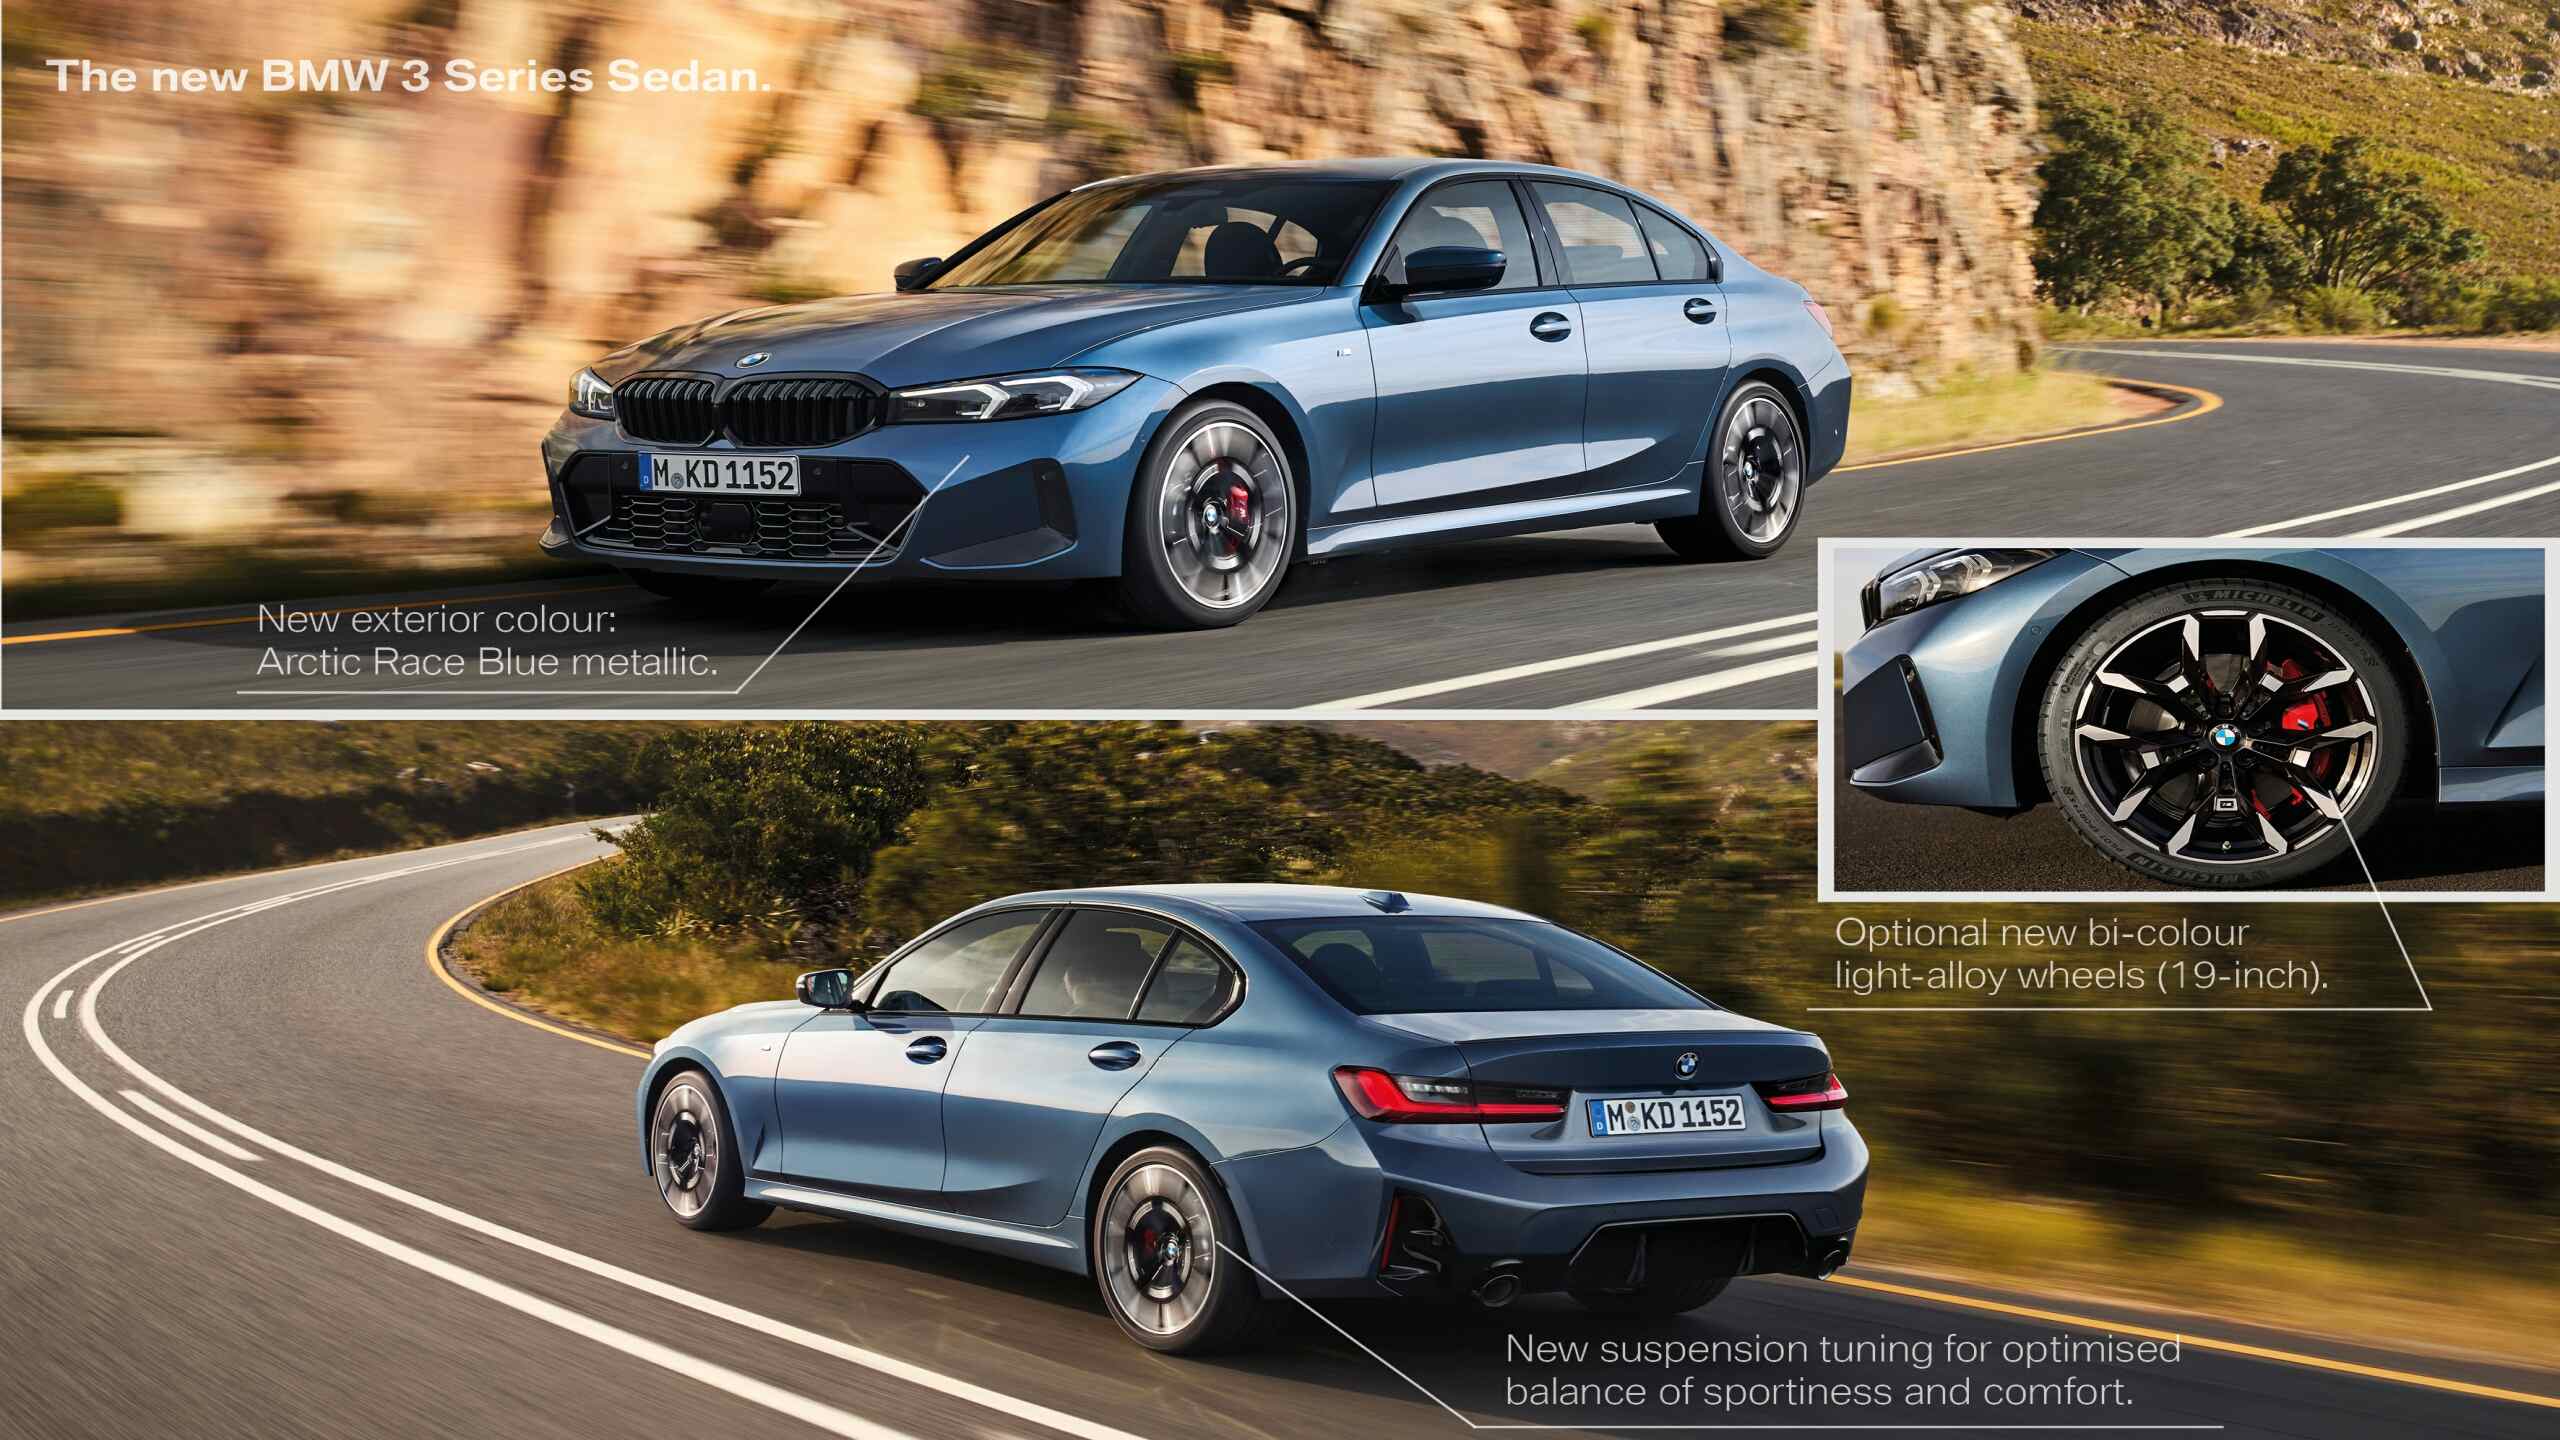 The Exterior Highlights Of The New BMW 330i Sedan (BMW)